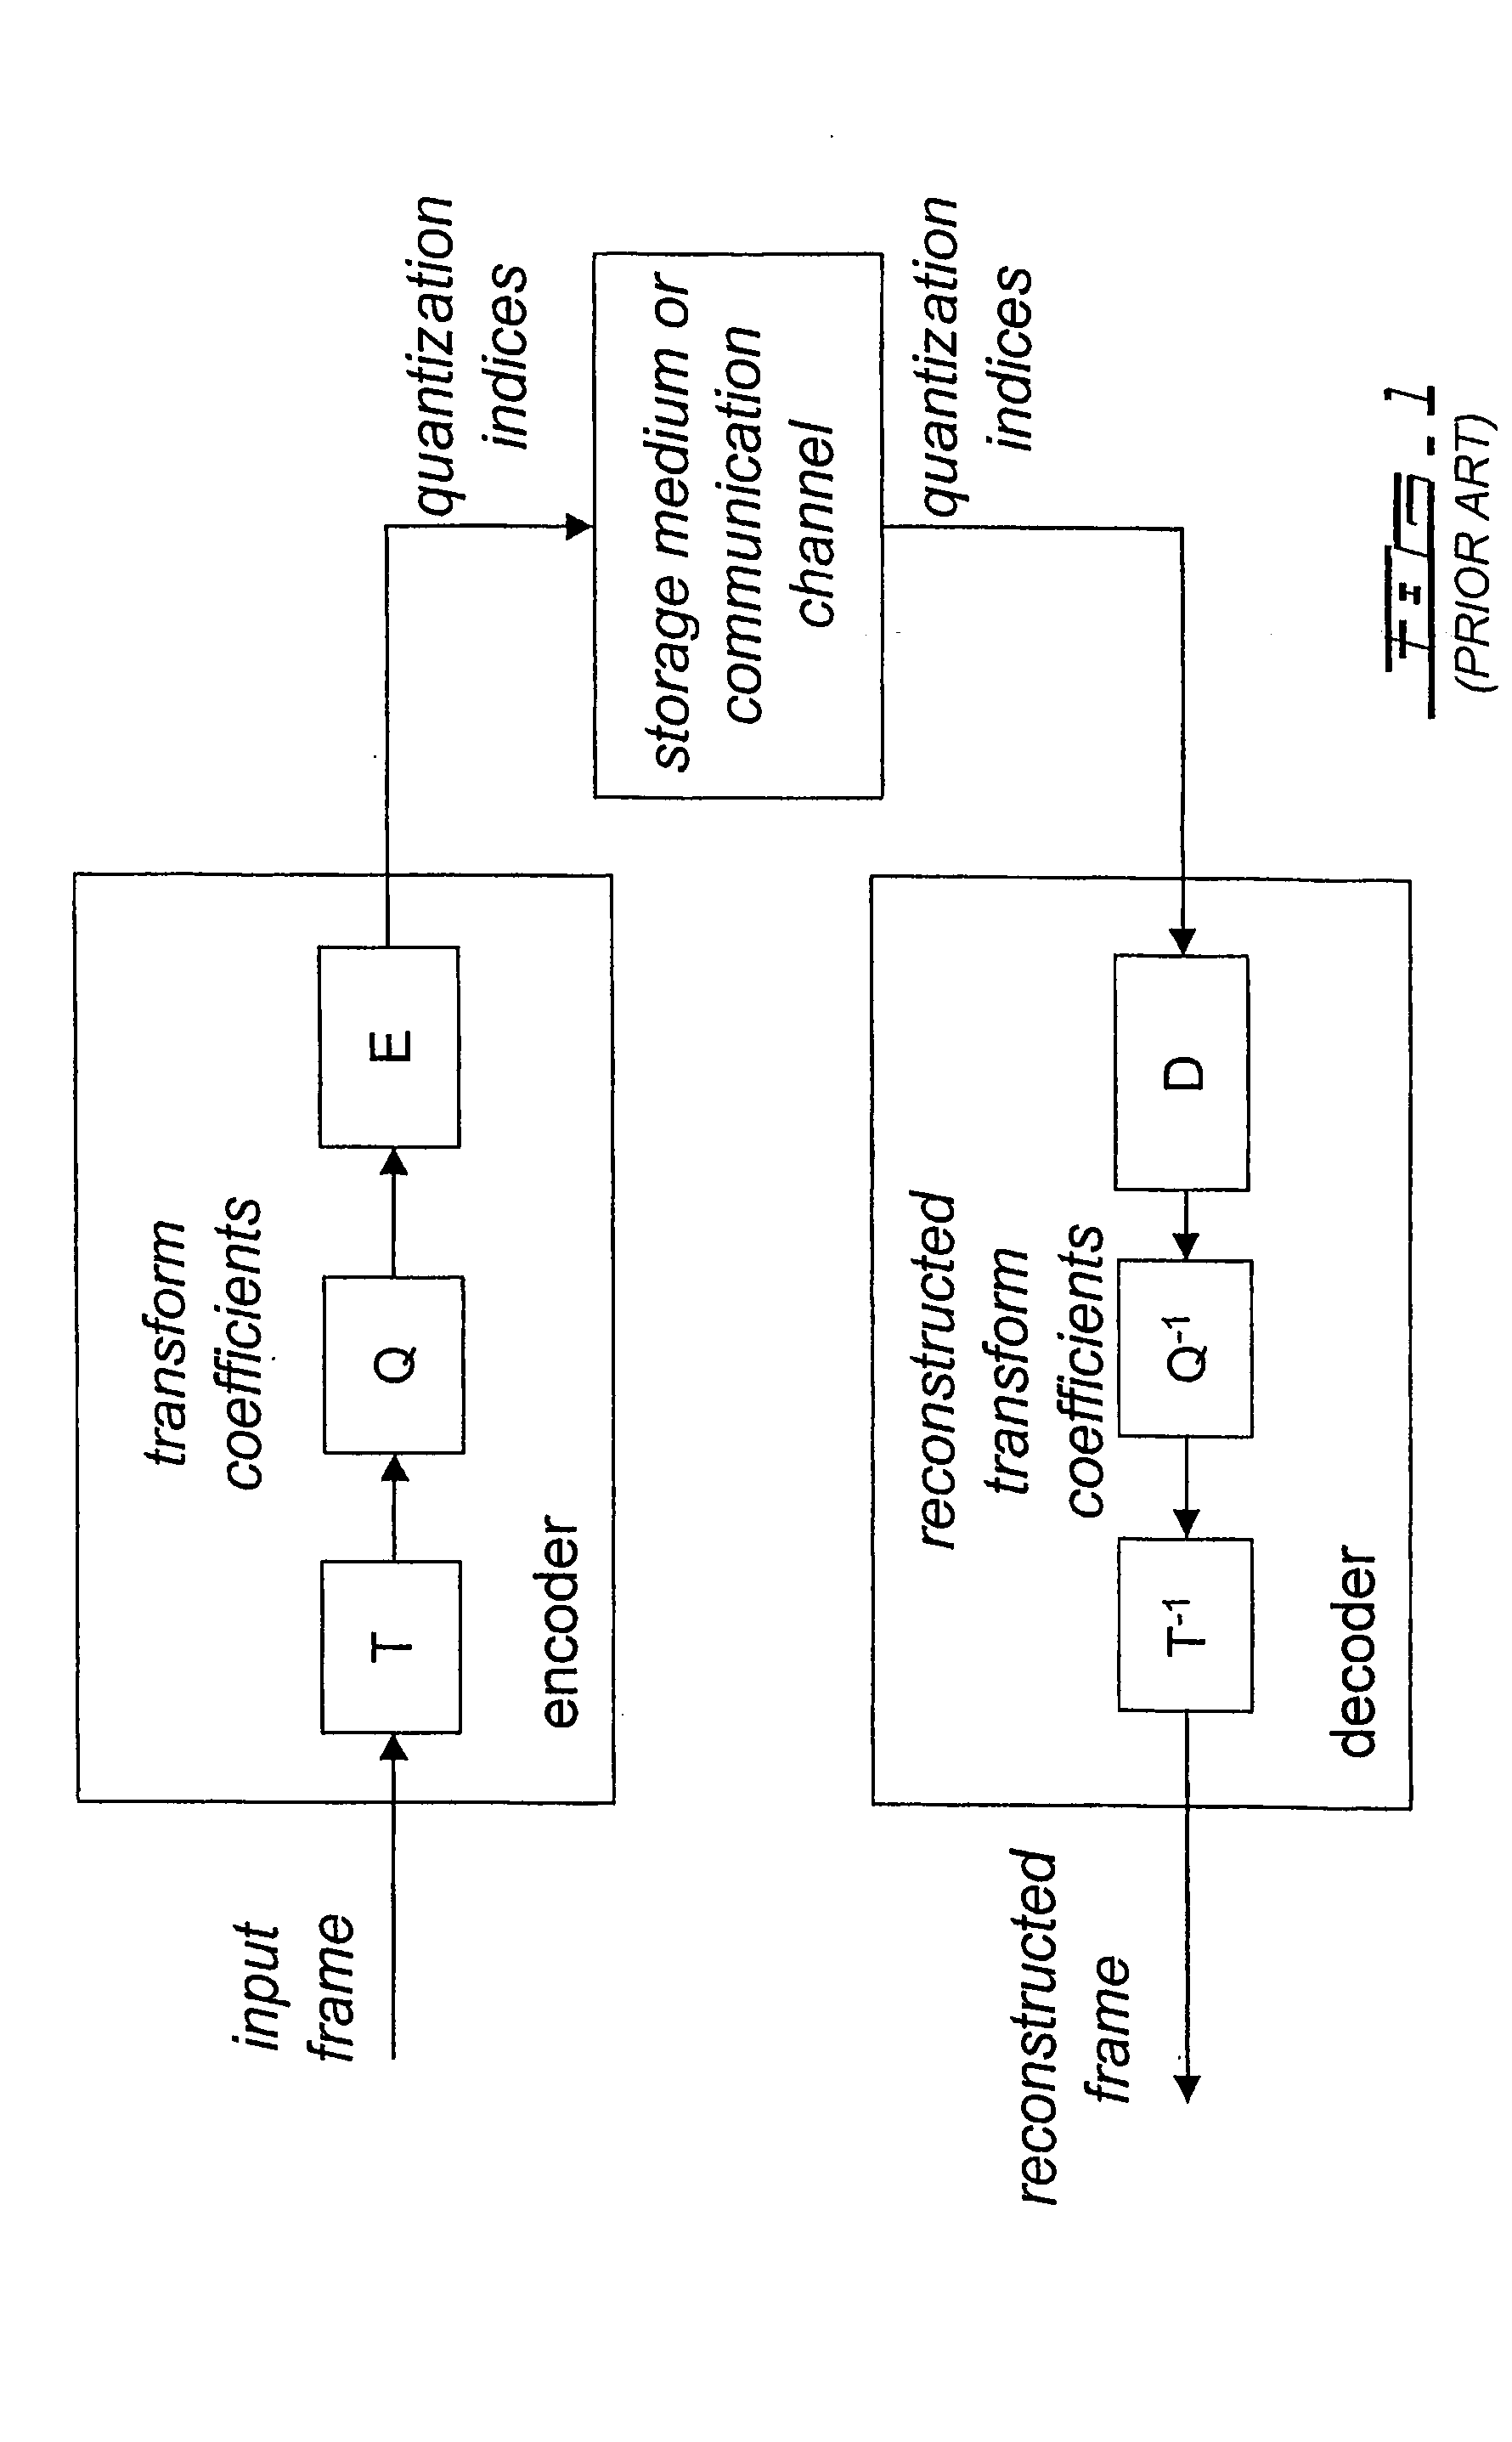 Method and system for multi-rate lattice vector quantization of a signal